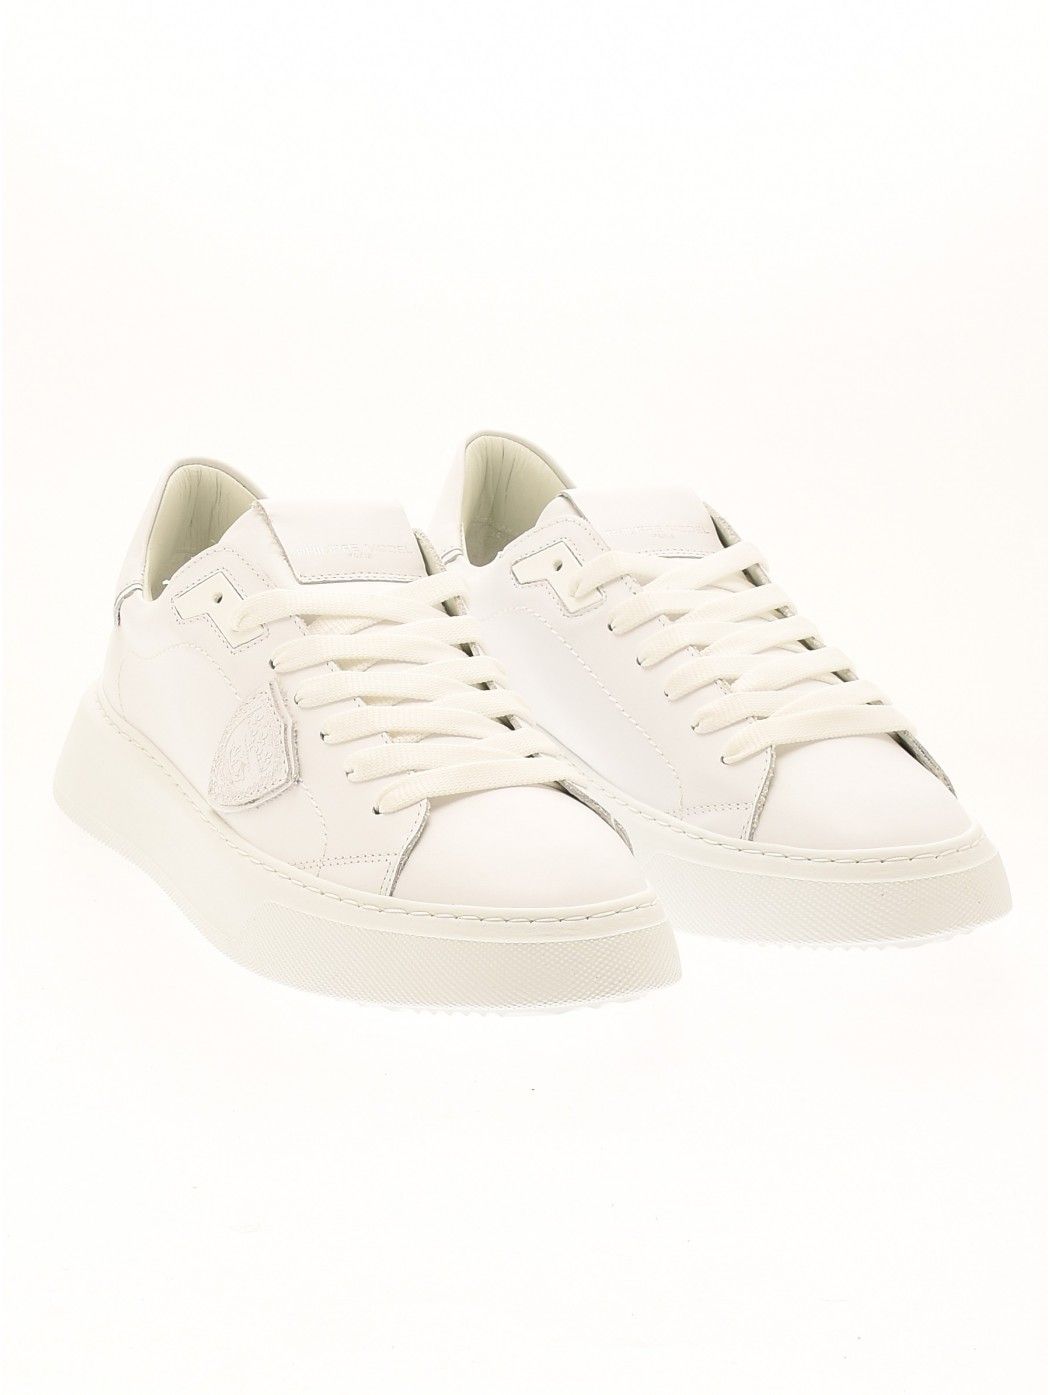 SNEAKERS DONNA TEMPLE PHILIPPE MODEL BTDL V001